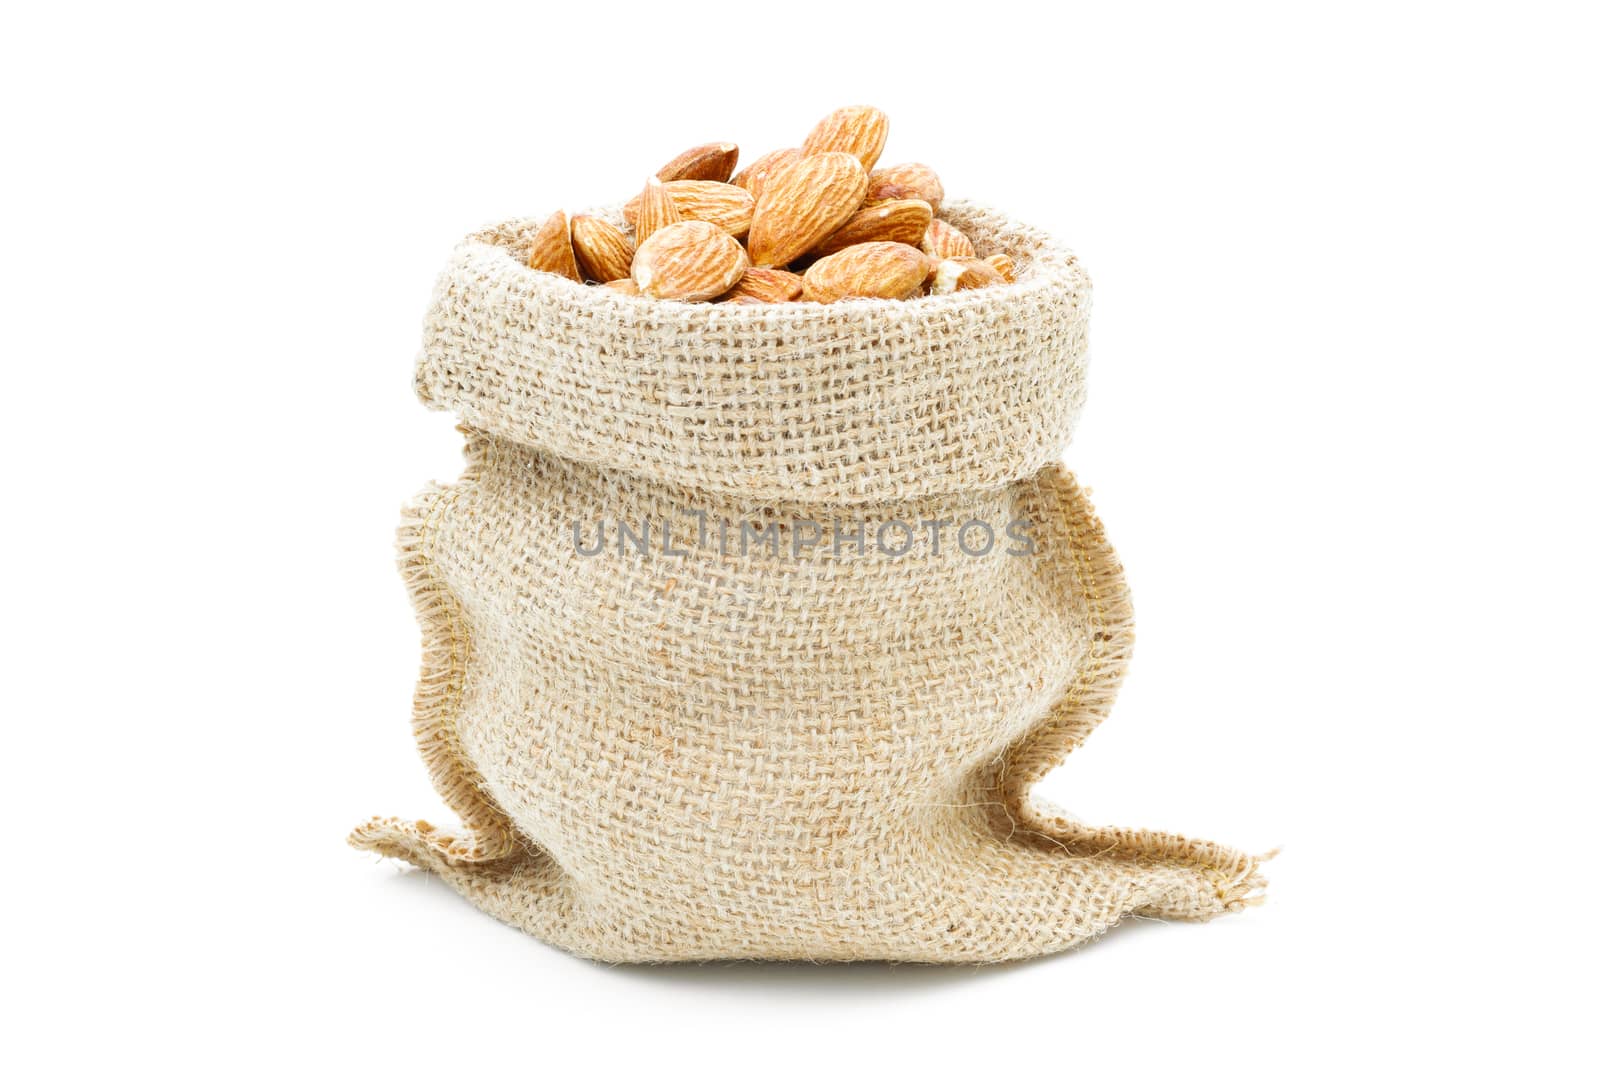 Almonds in a sack of cloth on a white background by sompongtom